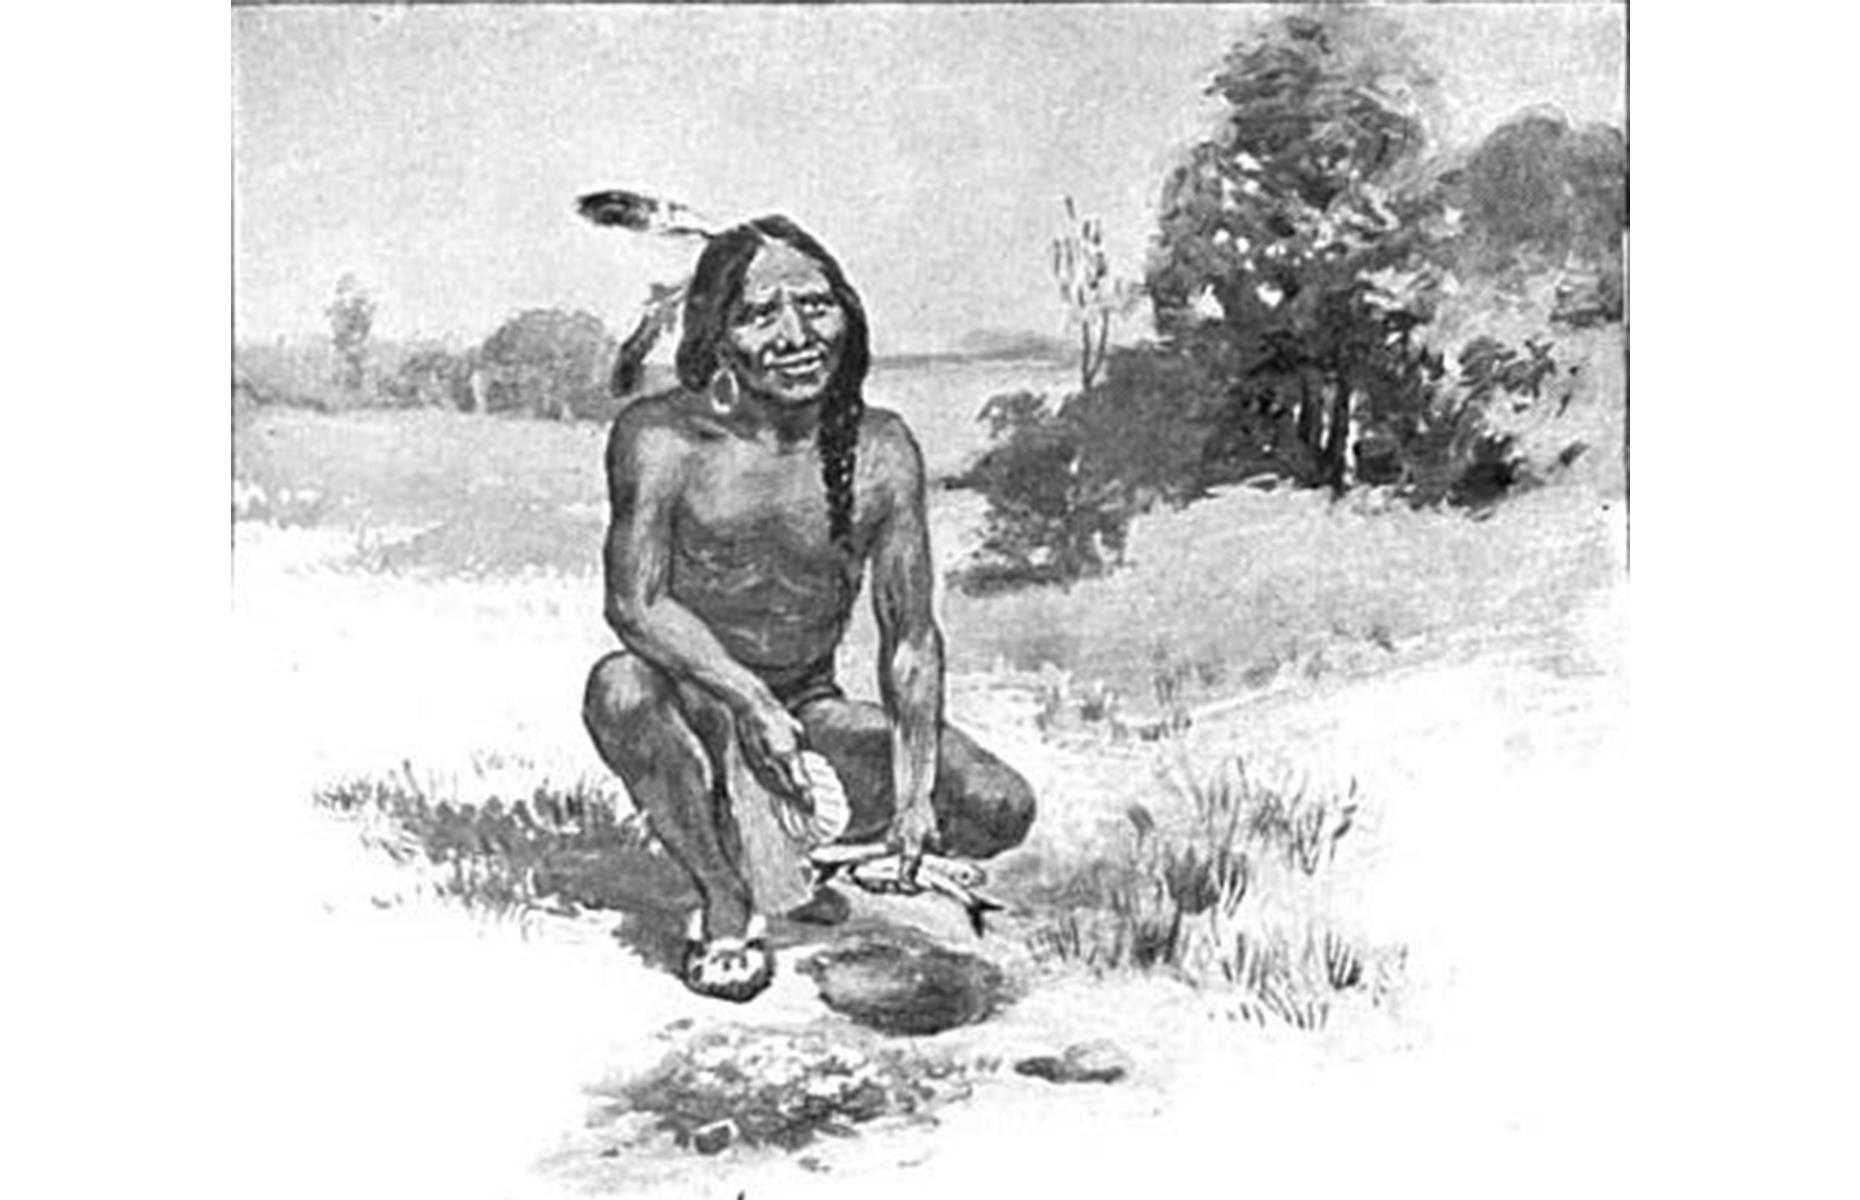 It's likely that even more Pilgrims would have met their death if it wasn’t for the aid offered by the indigenous peoples here. Most notably, Samoset of the Abenaki tribe and Tisquantum (pictured here, also known as Squanto) of the Patuxet tribe, taught the colonists to fish, hunt and grow corn, all of which was vital for their survival. Tragically, Squanto passed away during an expedition on Cape Cod with governor William Bradford.